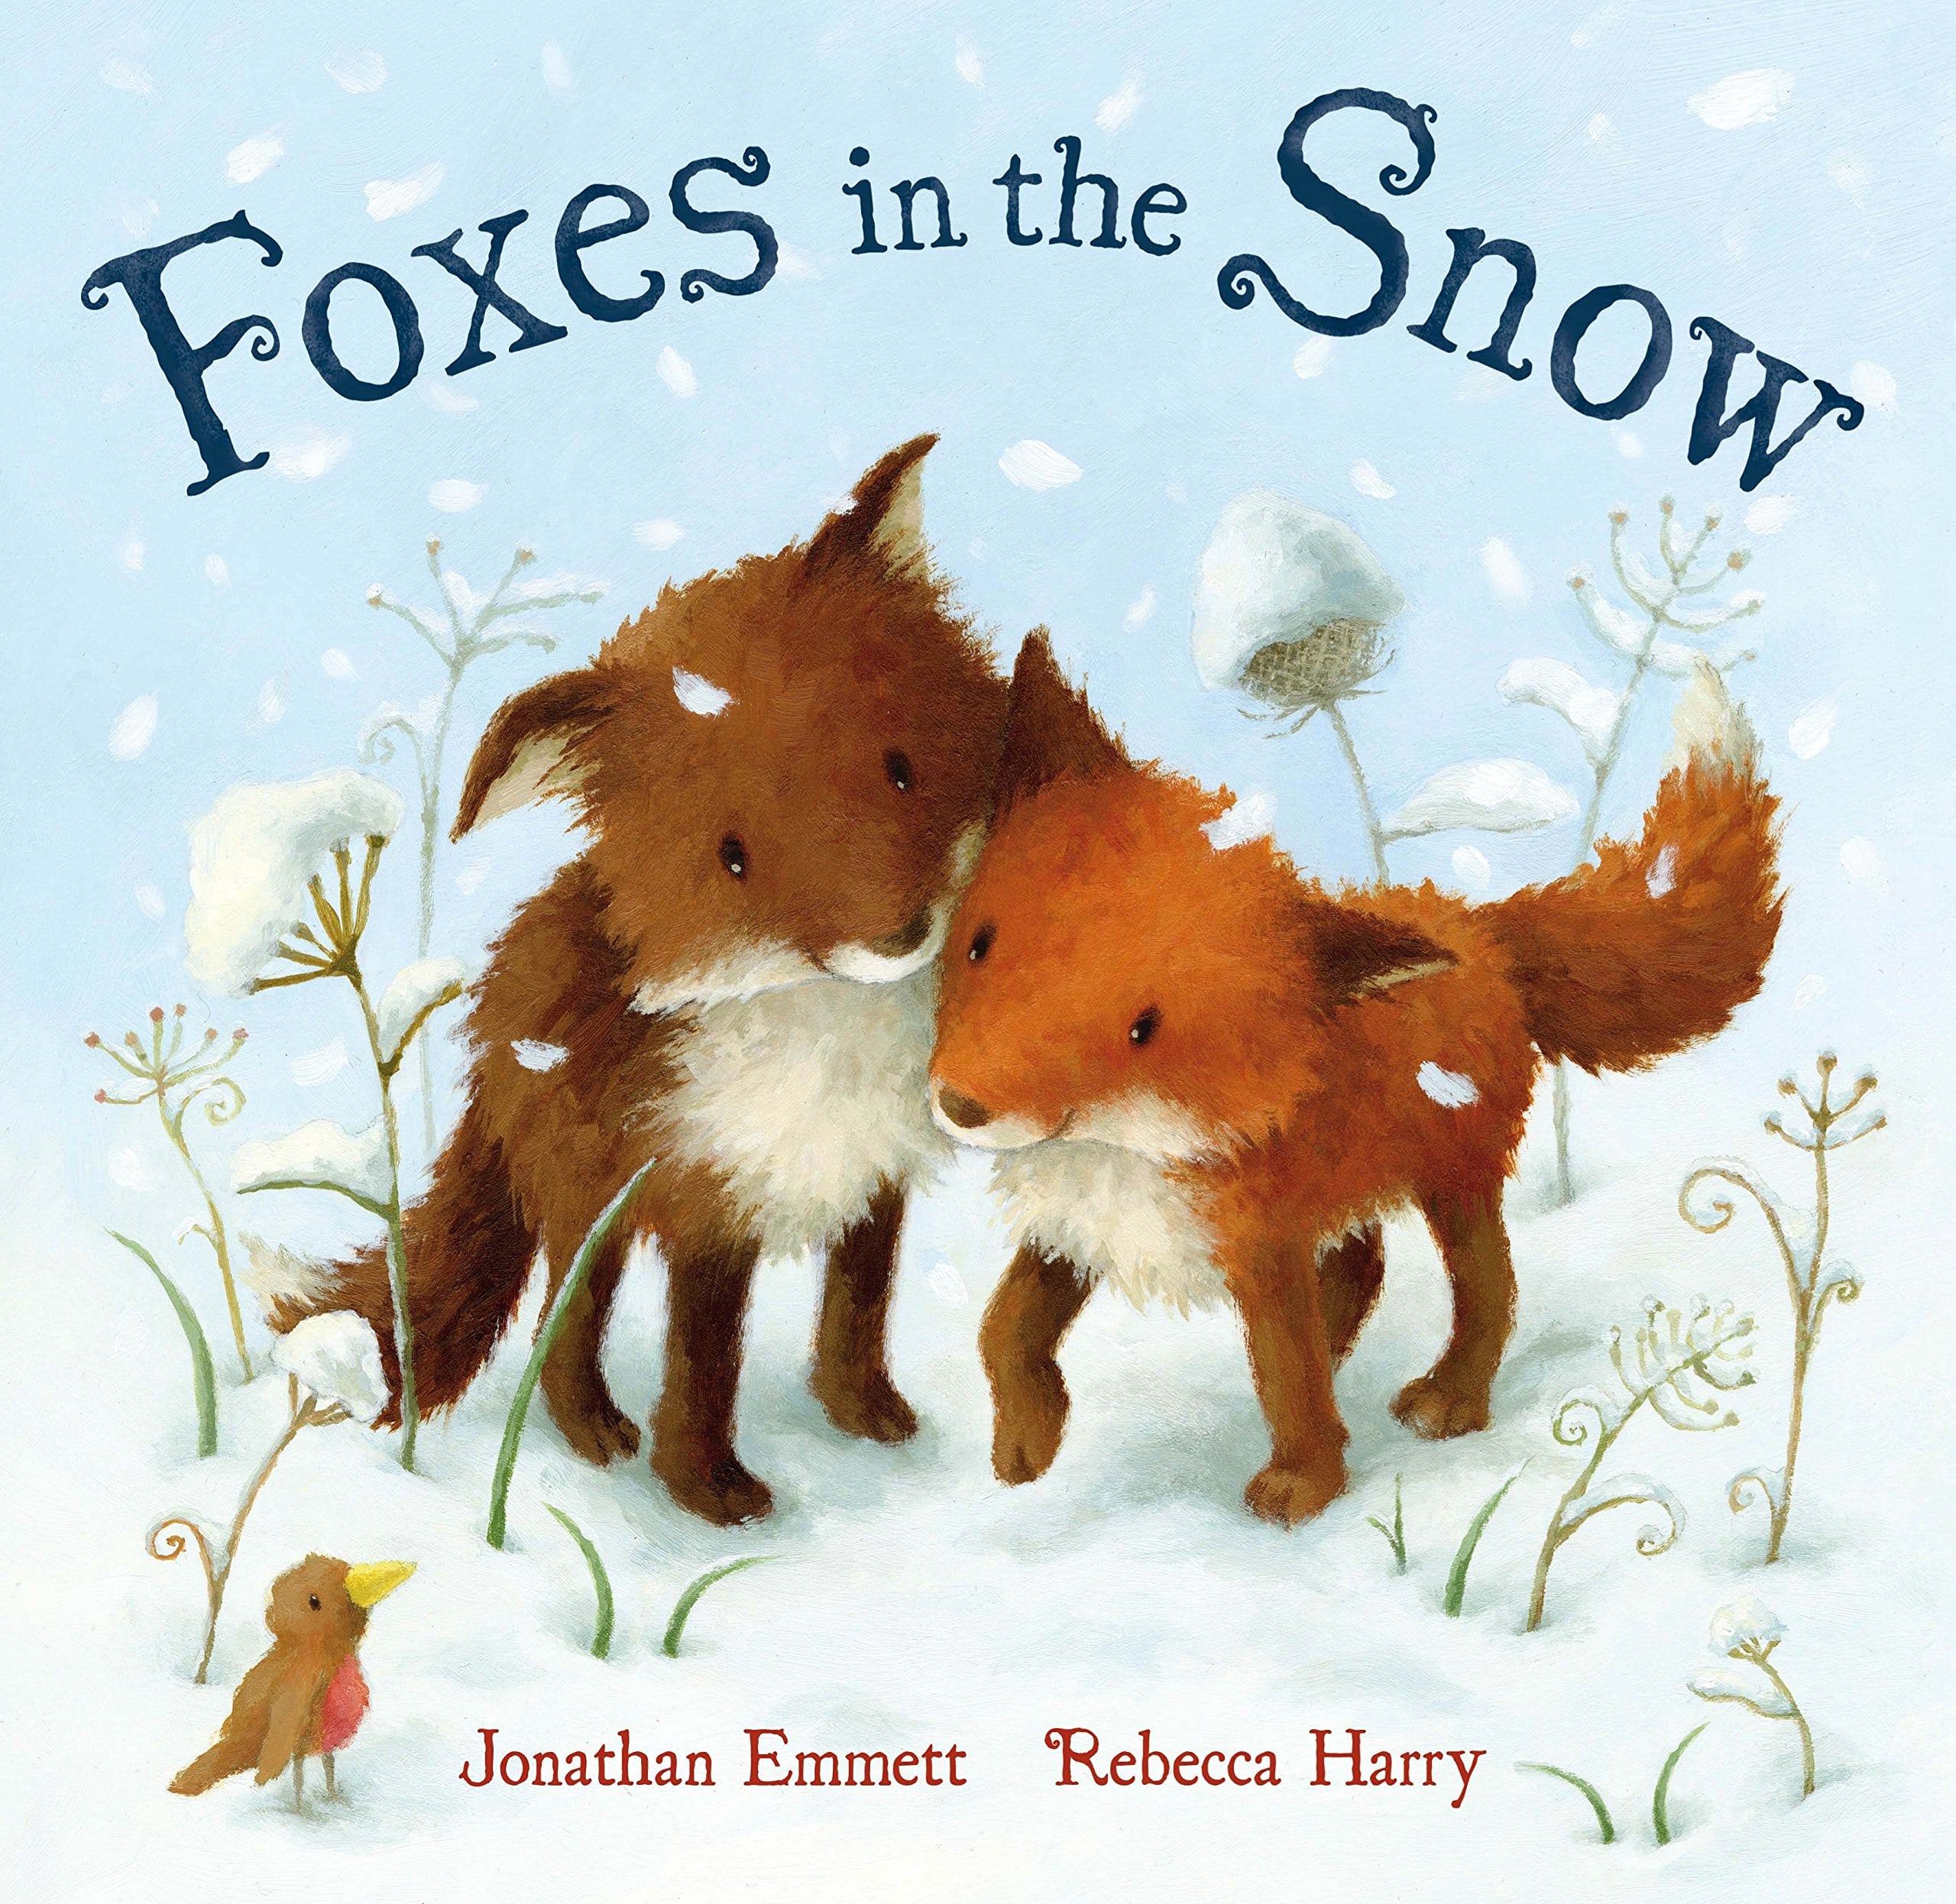 IMG : Foxes in the Snow